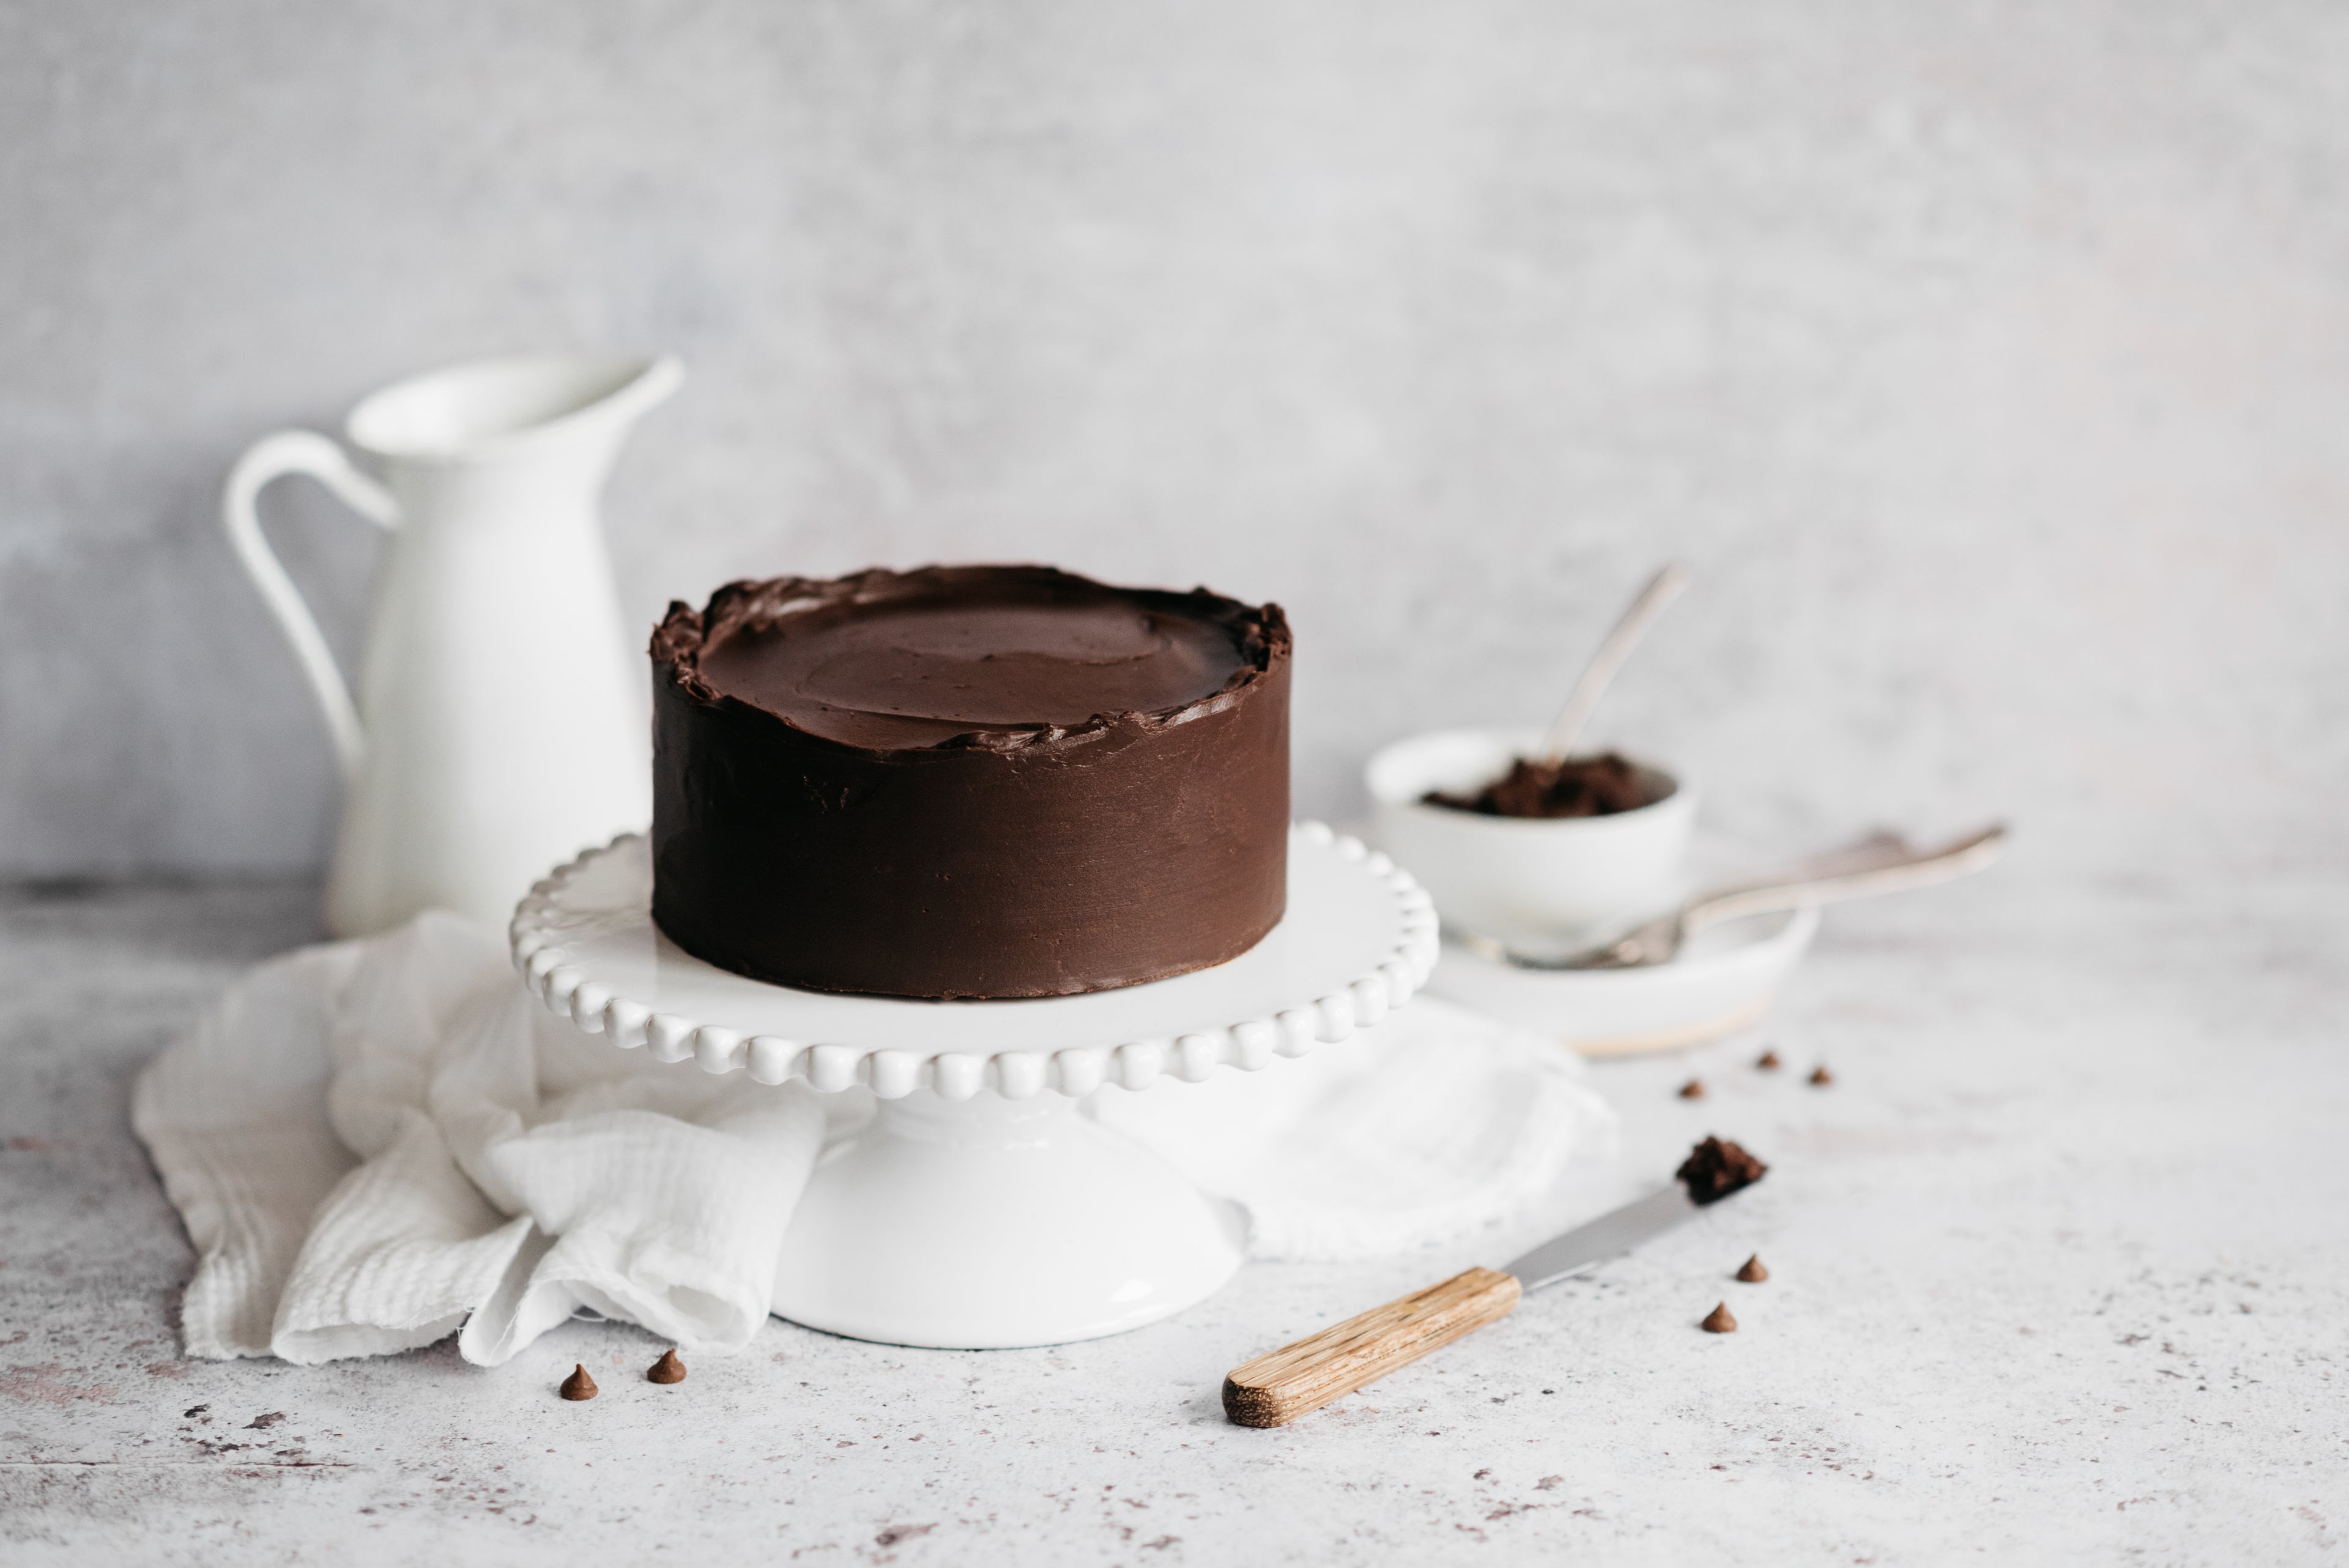 Chocolate Biscuit Cake served on a cake stand, with a palette knife with chocolate ganache